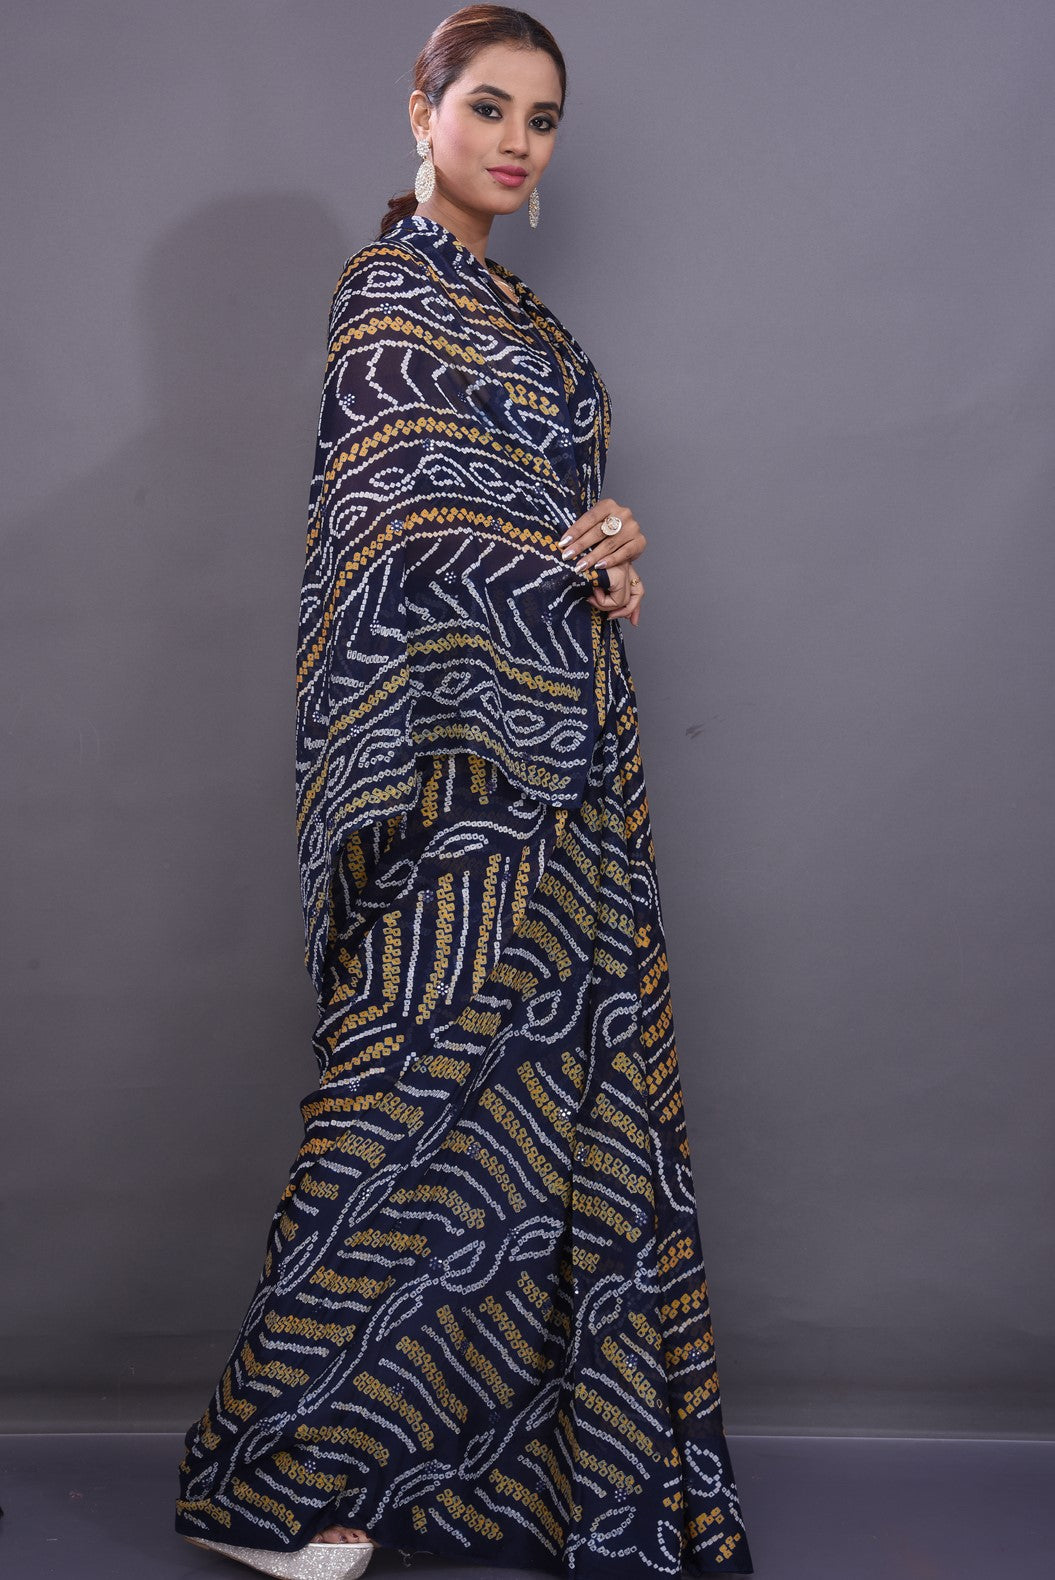 Shop attractive dark blue Bandhej print chiffon sari online in USA. Stand out at weddings and festive occasions with your tasteful choice in this gorgeous chiffon saris,  printed sarees, Bandhej saris, handwoven sarees from Pure Elegance Indian fashion store in USA. right